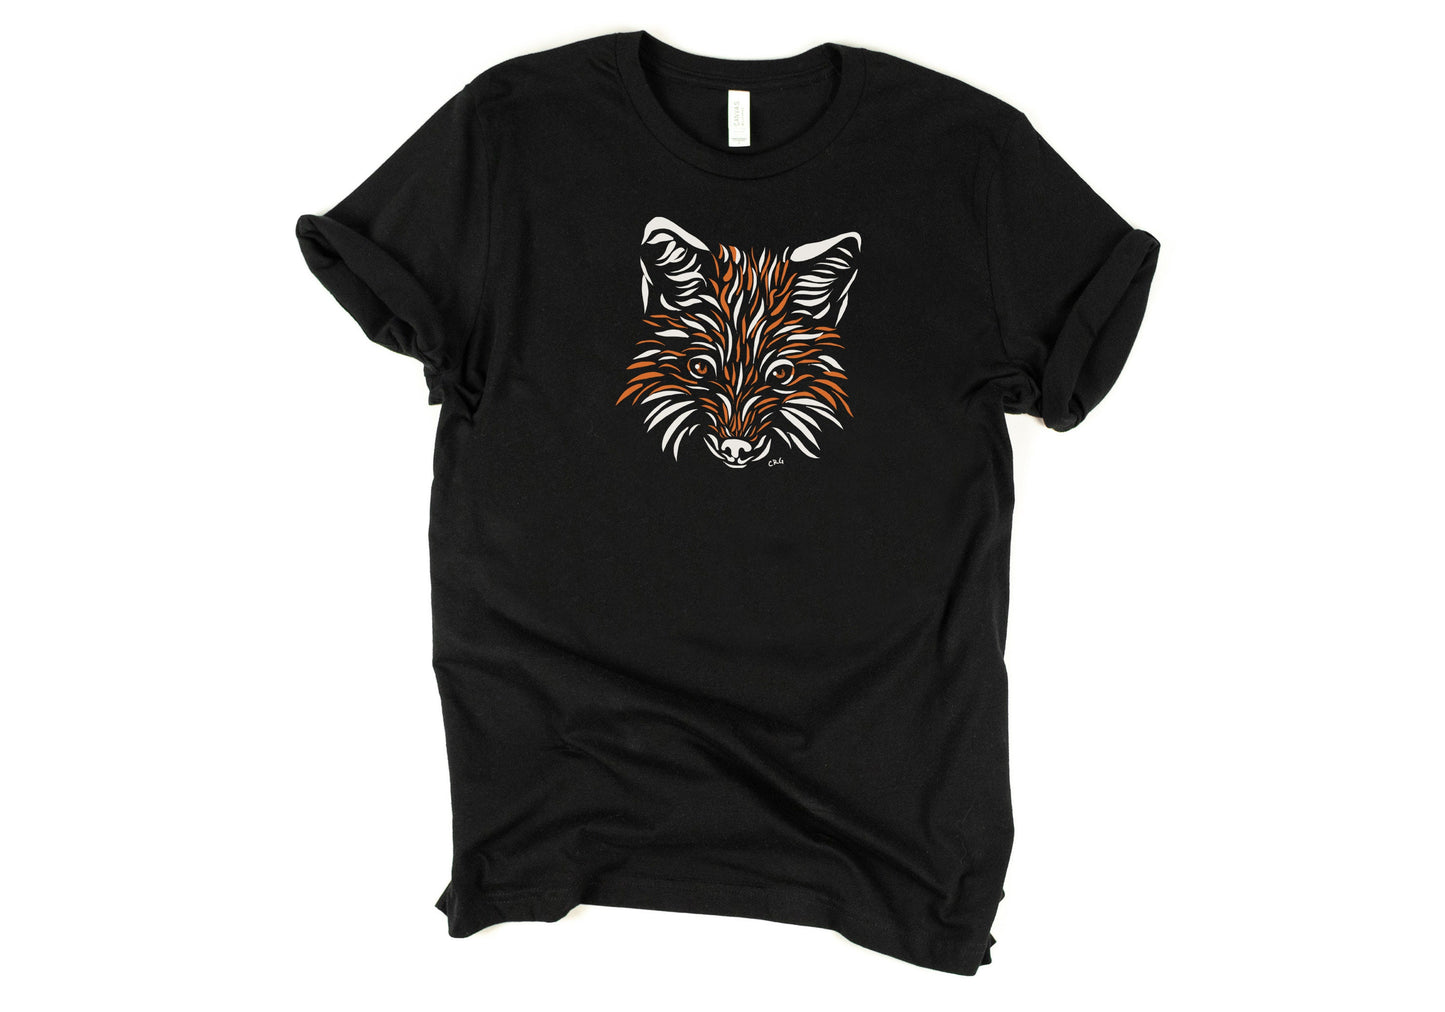 Red Fox Shirt  / Red Fox / Fox / Fox Shirt / Fox Gift / Fox TShirt / Fox Lover / Nature Shirt / Fox T-Shirt / Fox Tee / Foxes